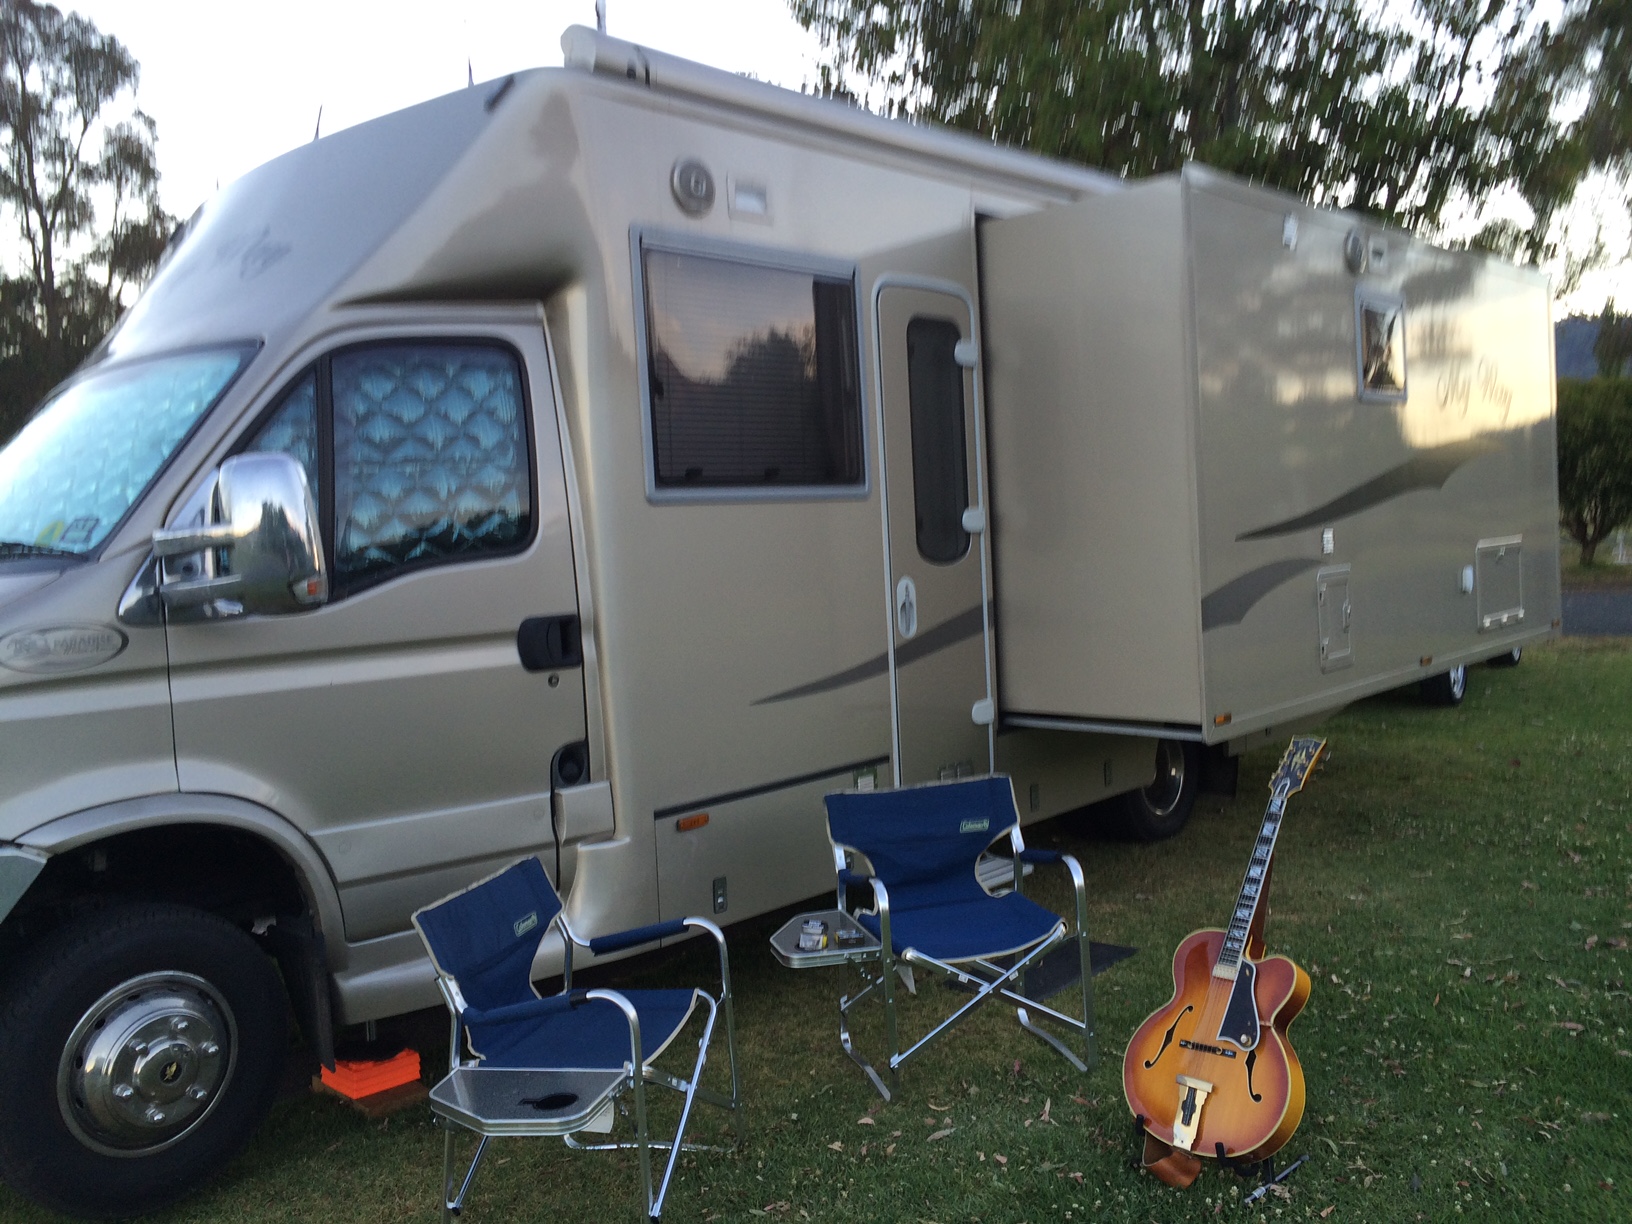 Which of these guitars would be best for a motorhome?-motor-home-jpg